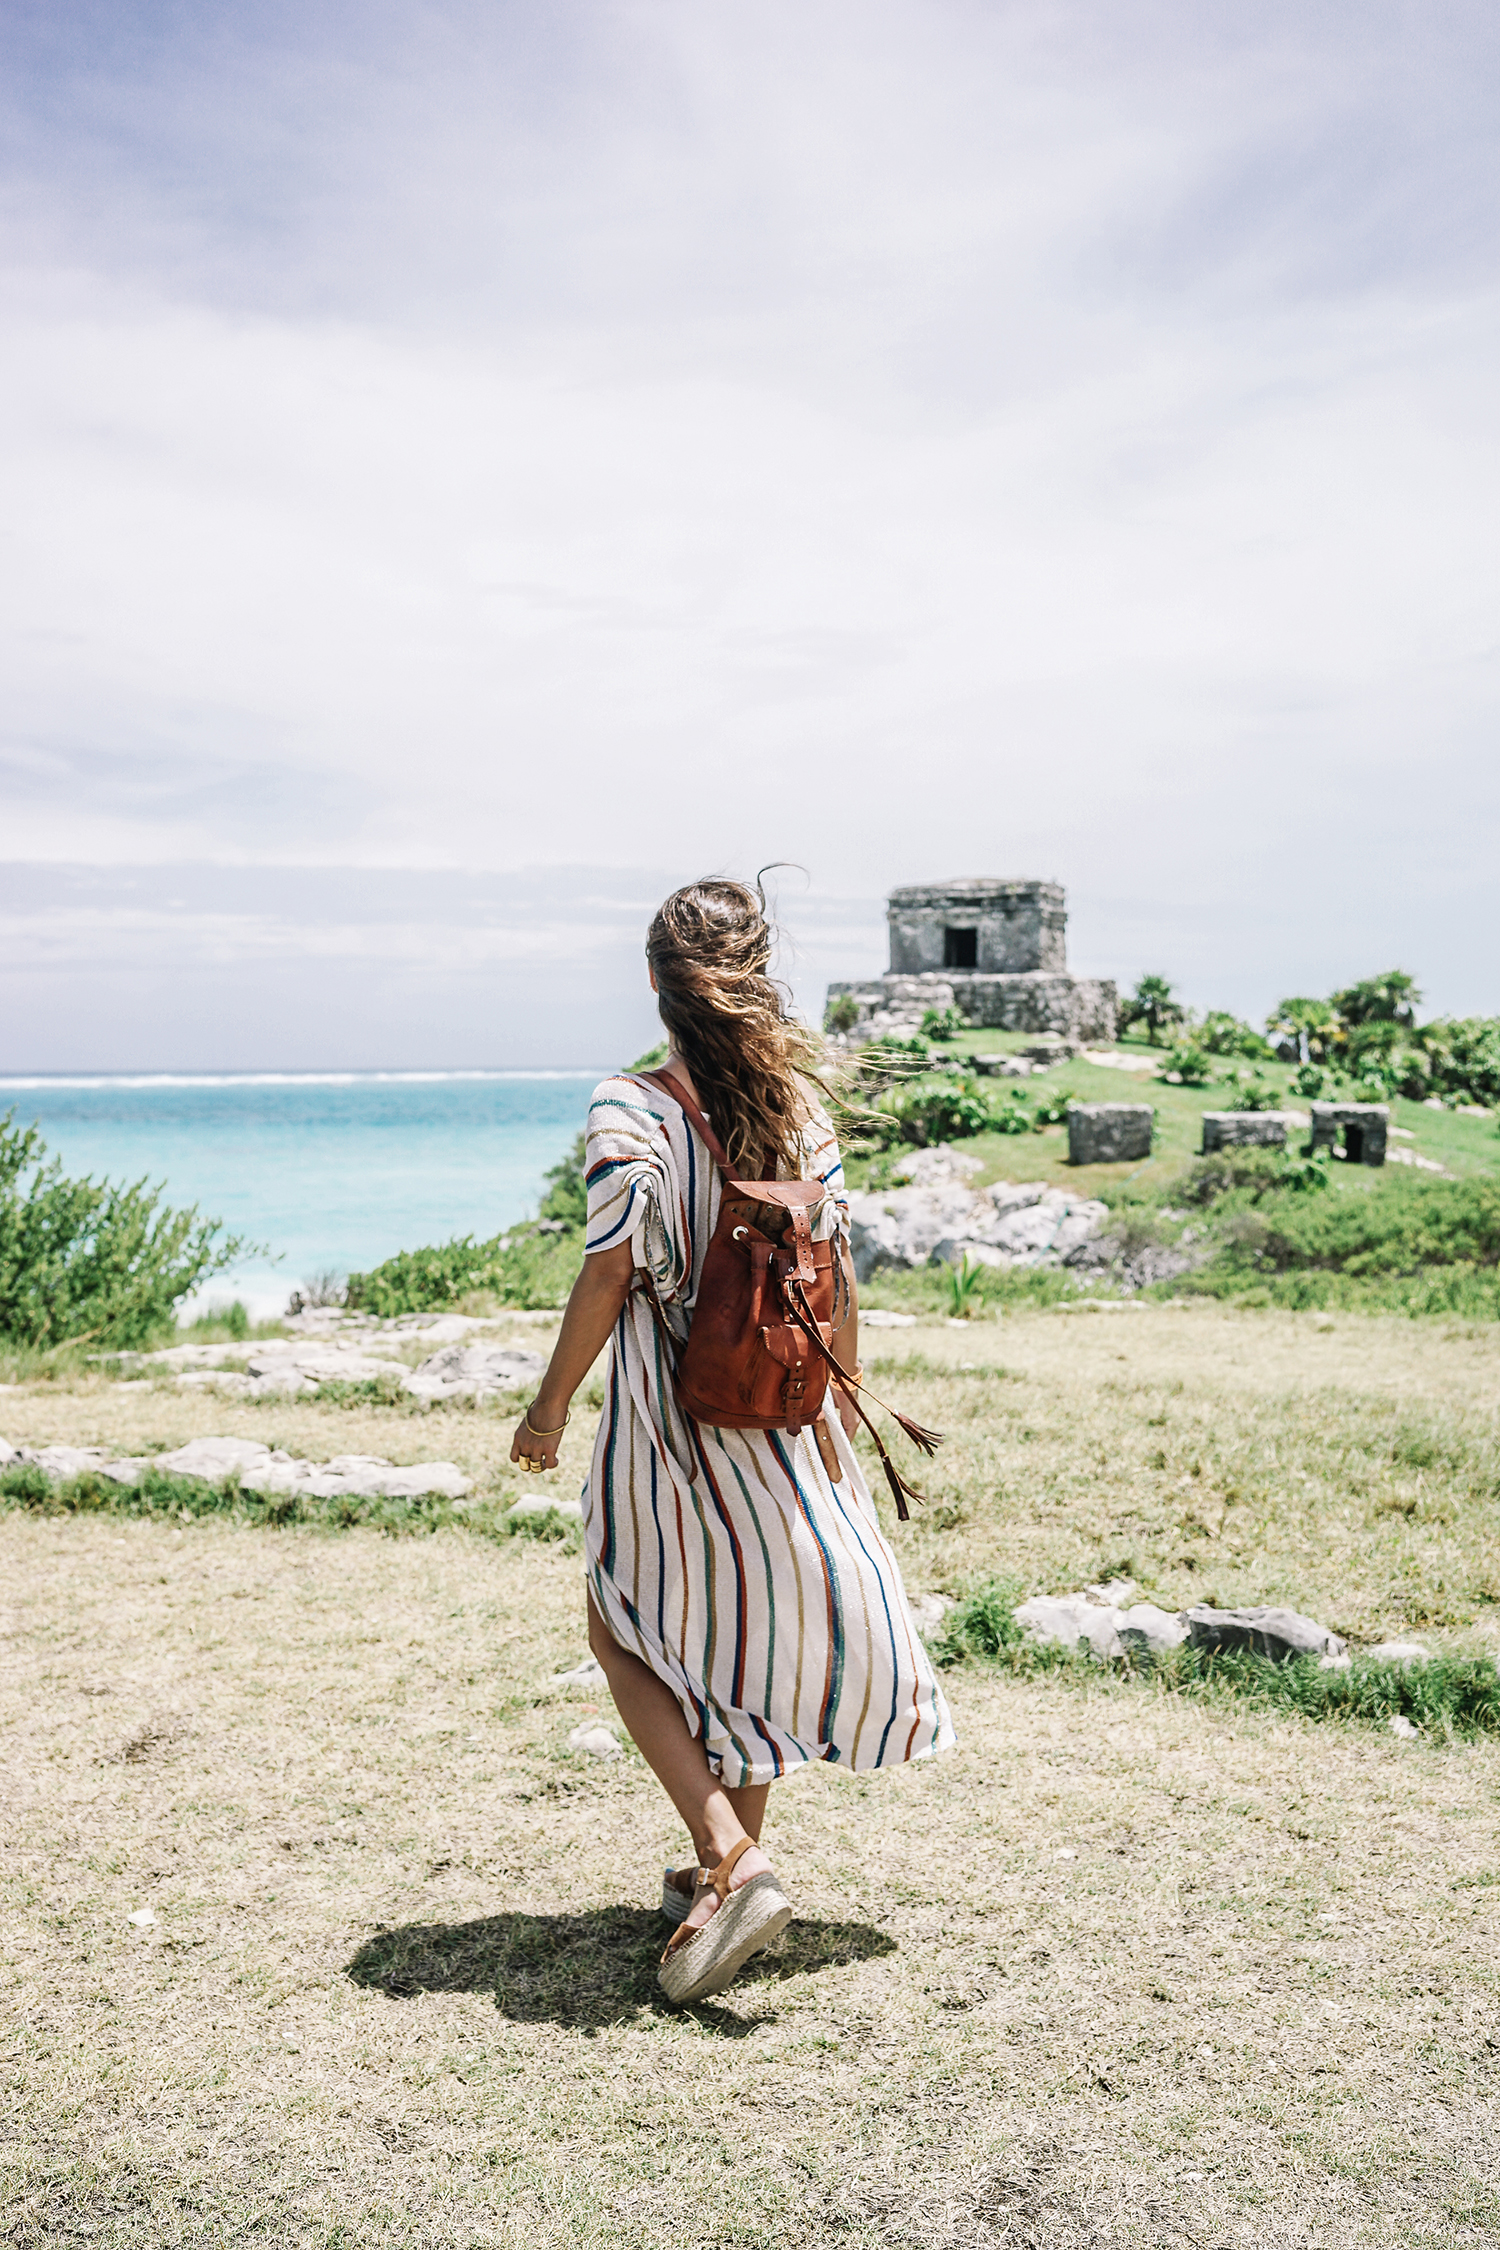 stripped_dress-leather_backpack-suede_espadrilles-mayan_ruins-hotel_esencia-sanara_tulum-beach-mexico-outfit-collage_vintage-32